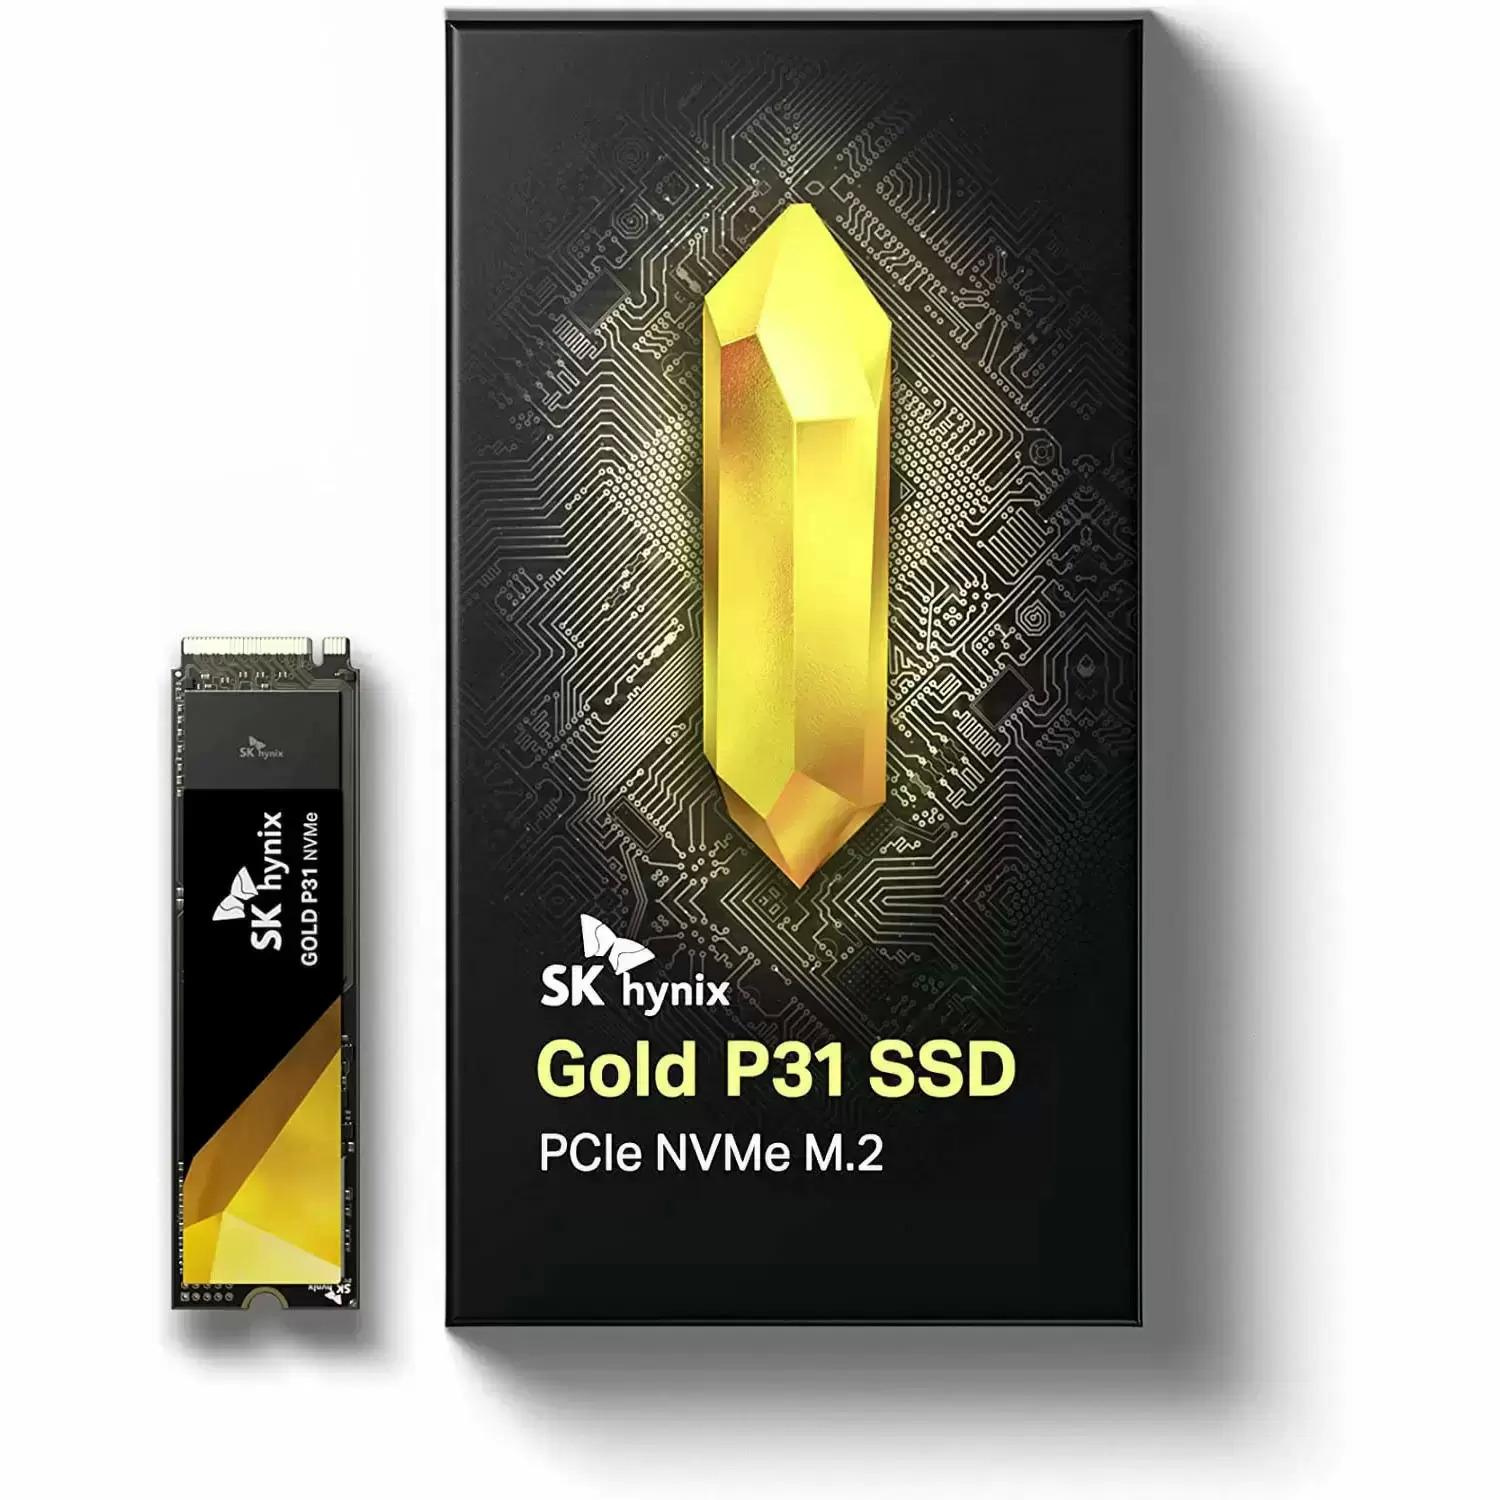 2TB SK hynix Gold P31 PCIe NVMe SSD Solid State Drive for $94.39 Shipped